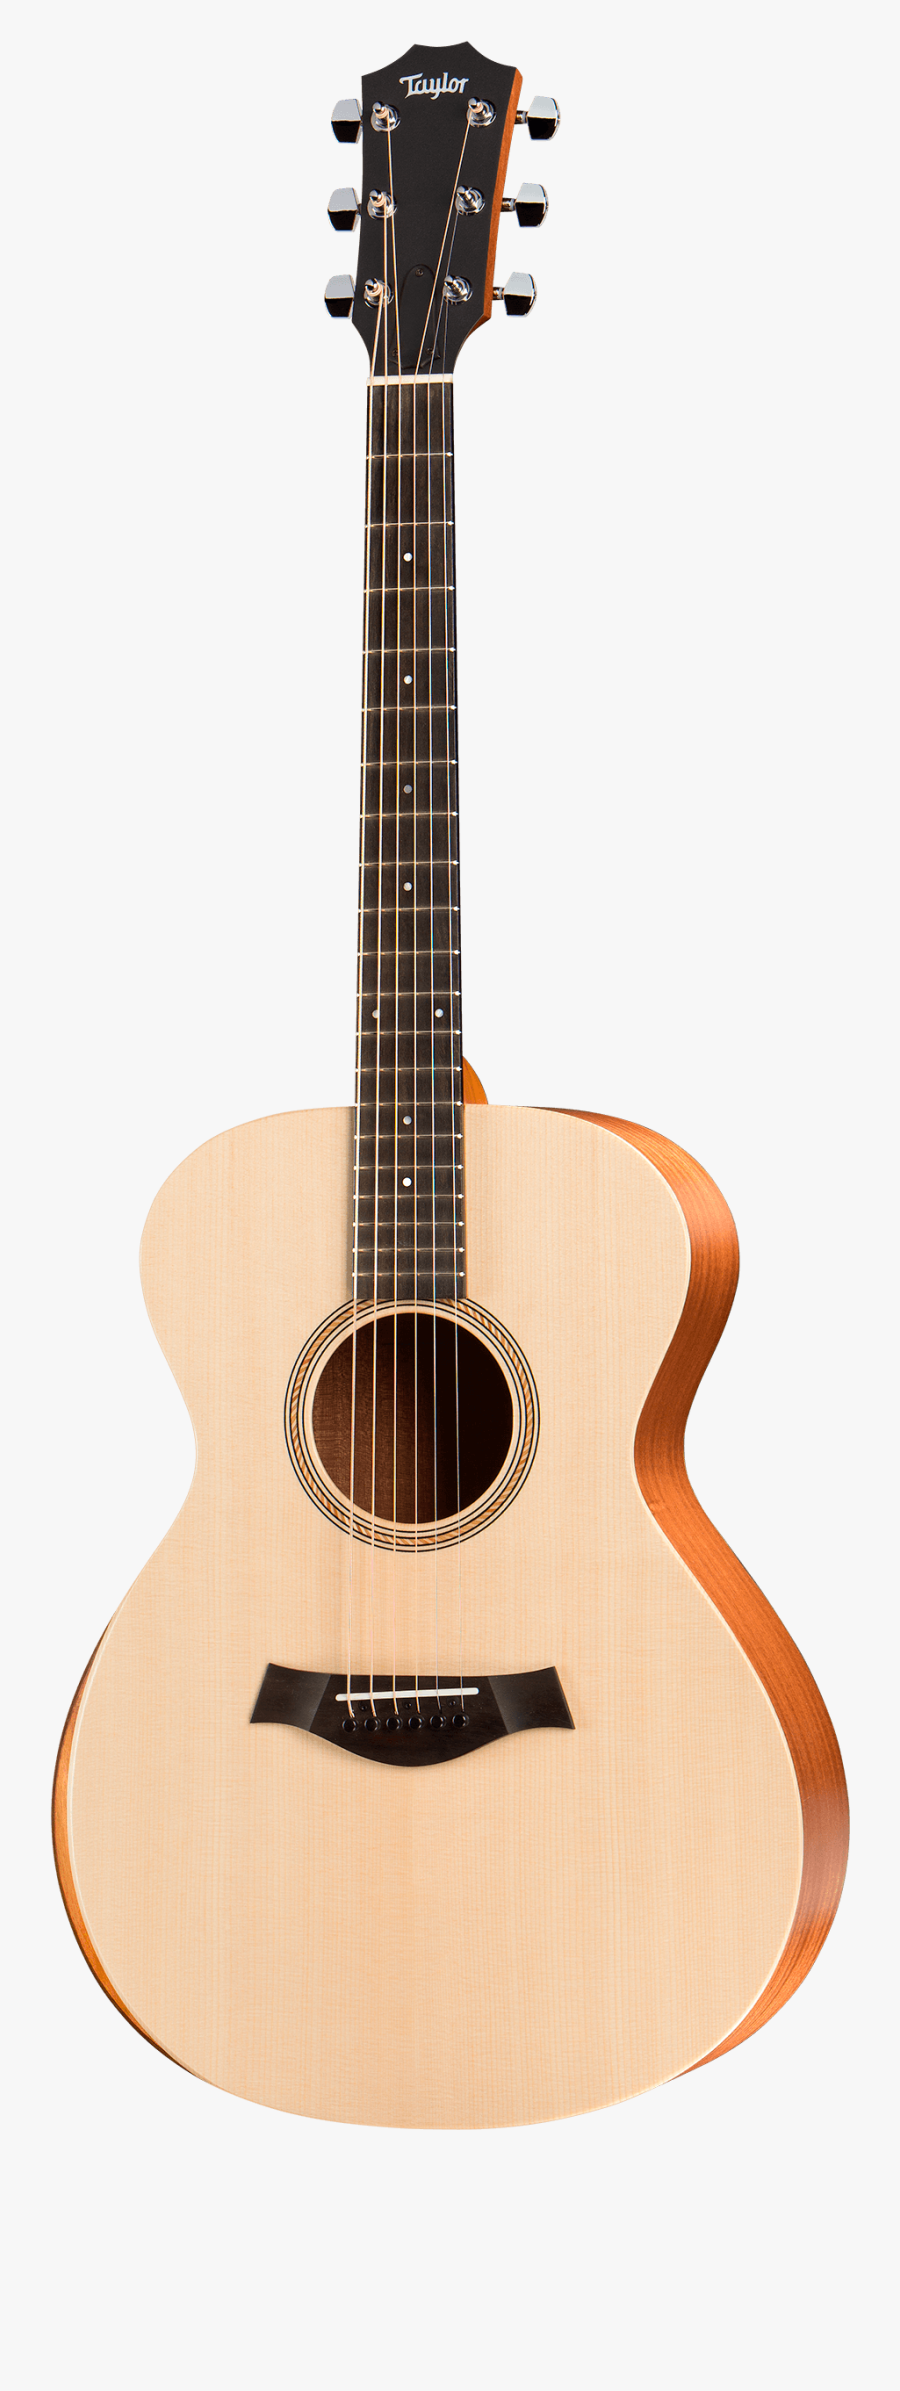 Graphic Free Download Drawing Guitars Pen - Taylor Guitar Academy 12e, Transparent Clipart